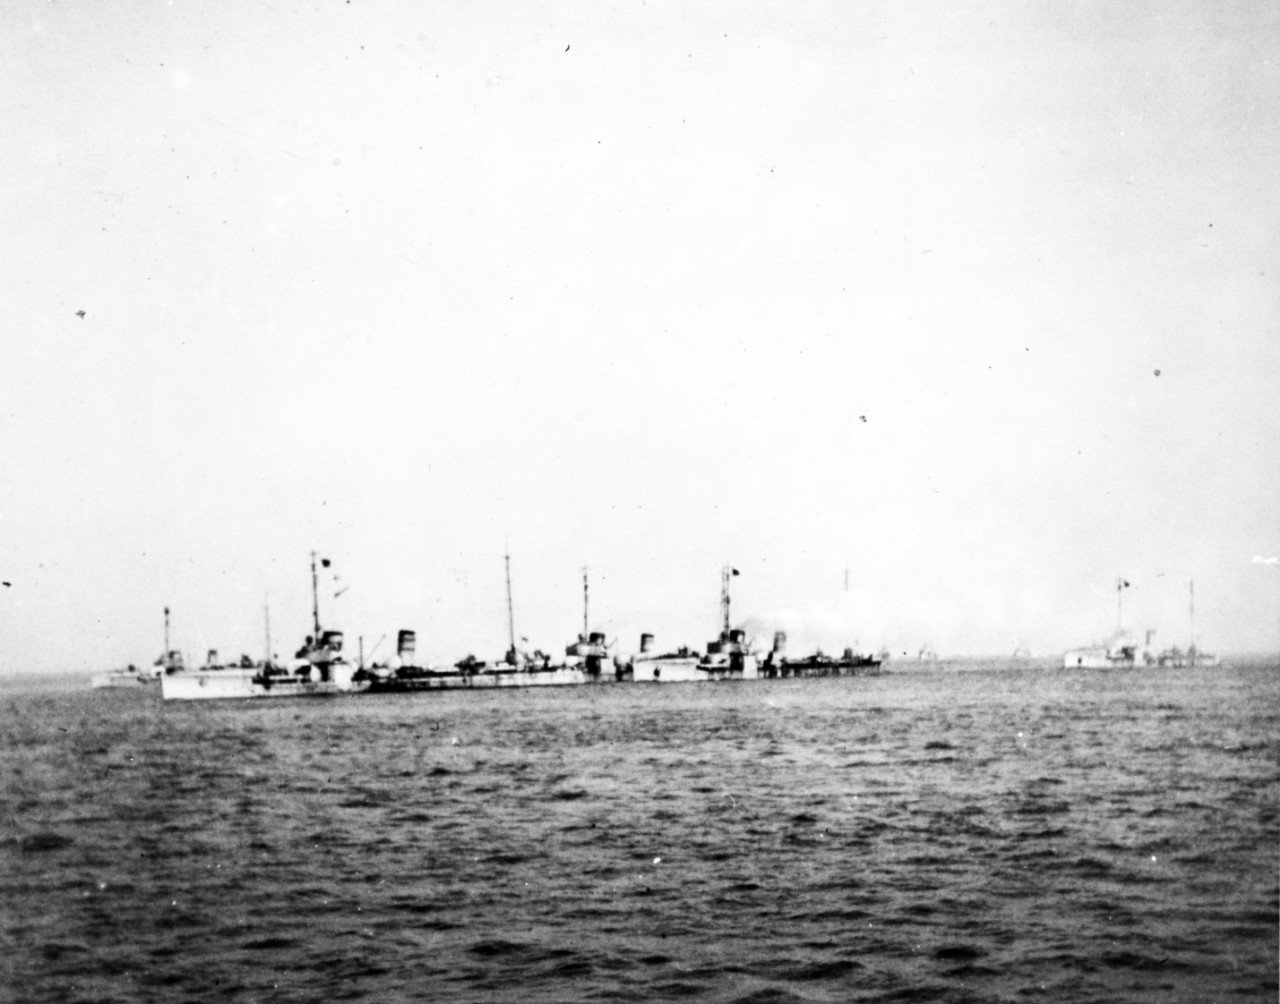 German destroyers seen in about 1915-1916.